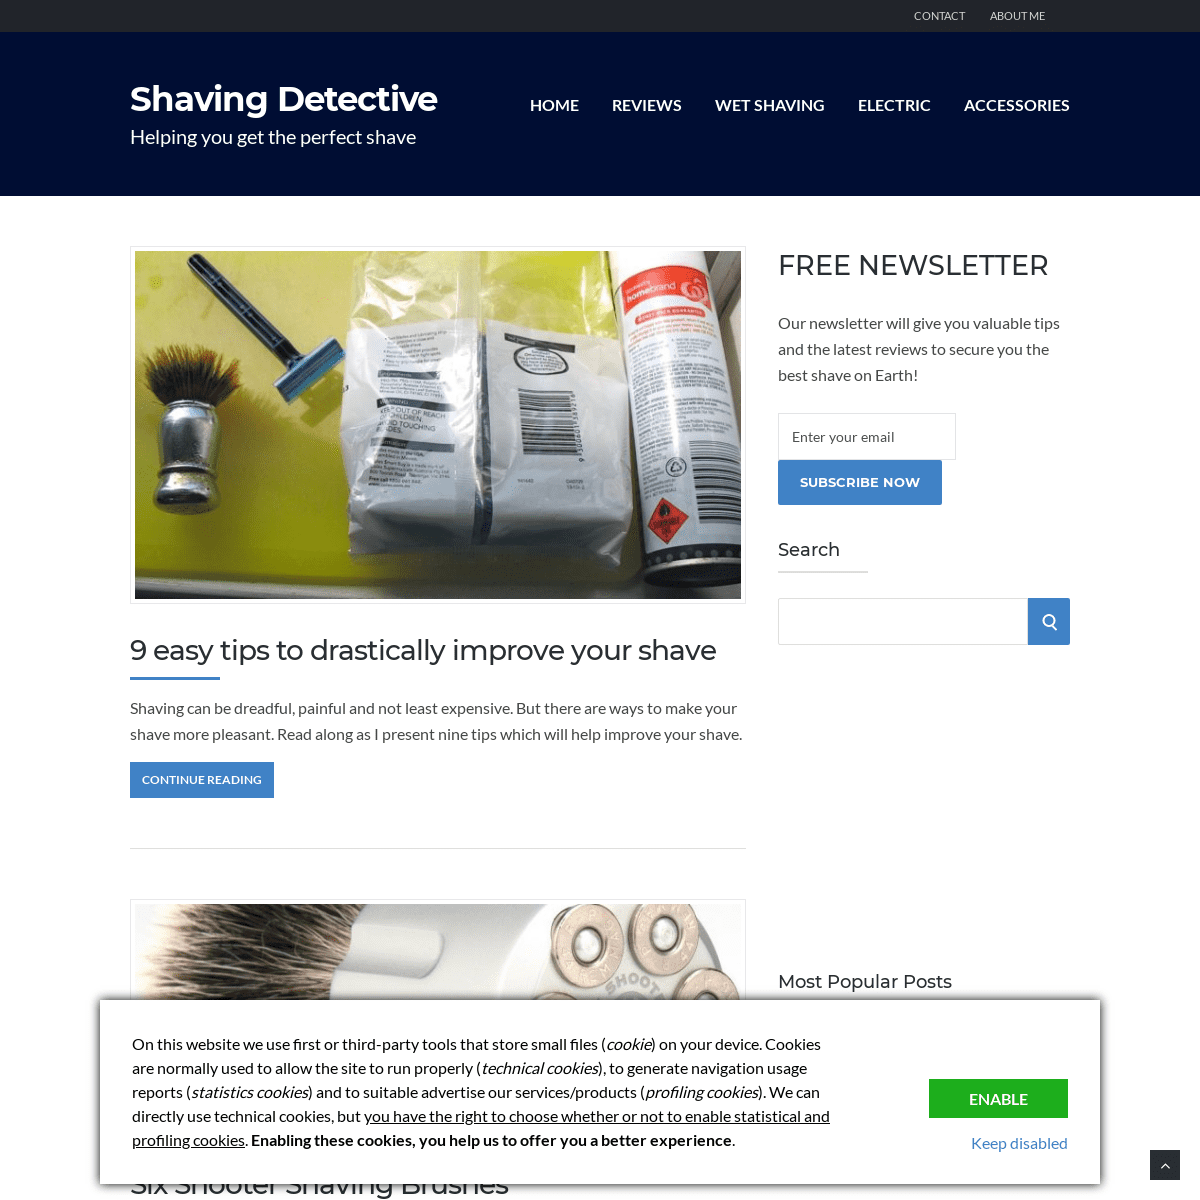 Shaving Detective - Helping you get the perfect shave